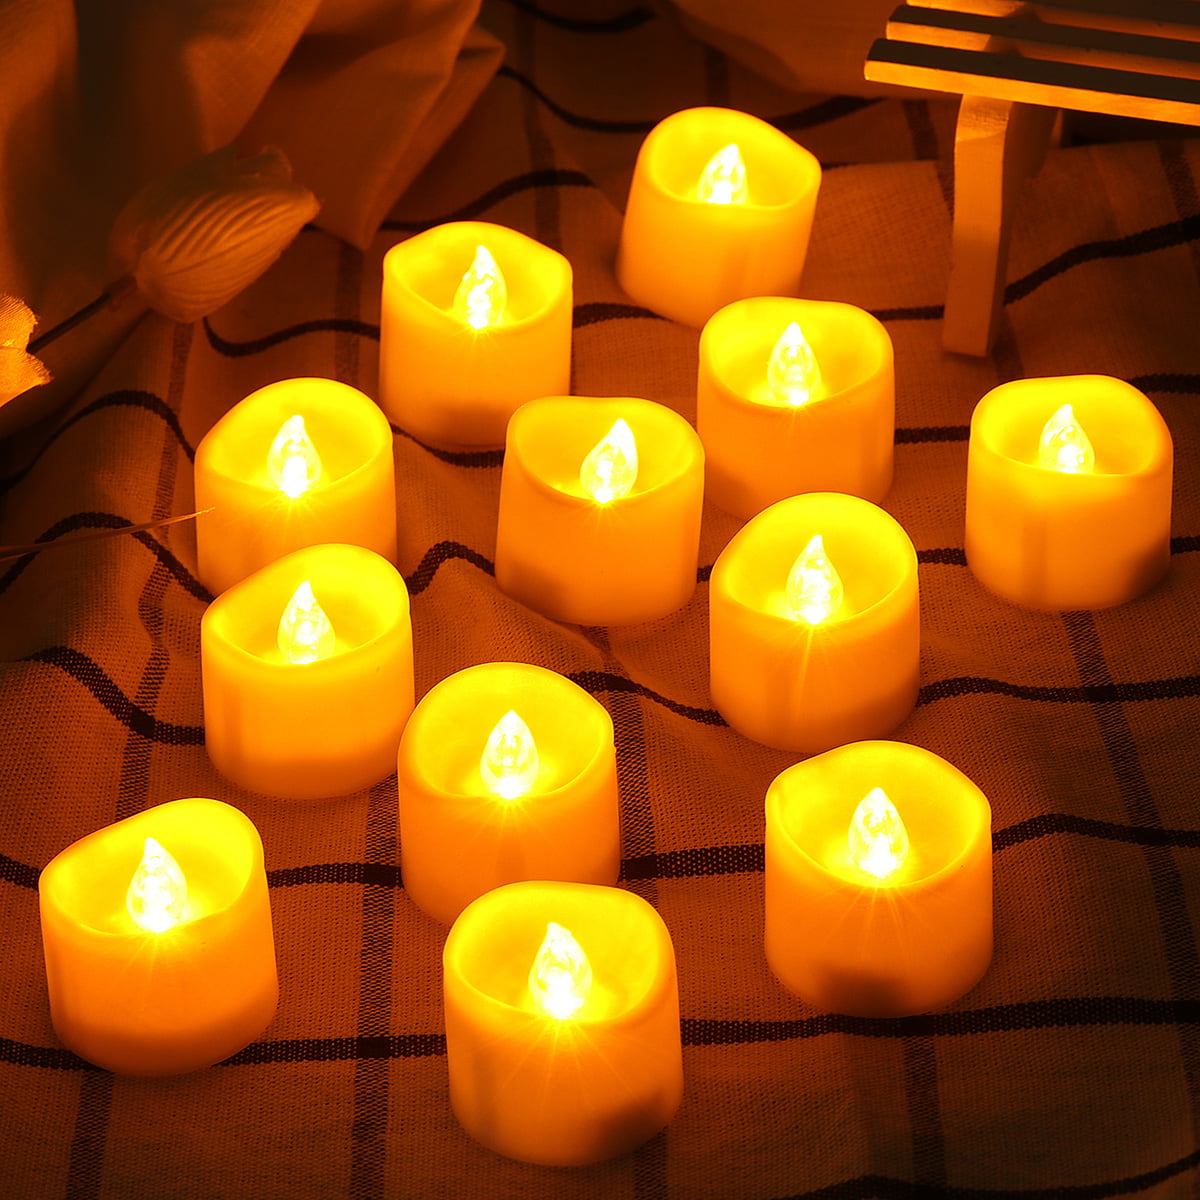 Qty 20 Battery Operated Flickering AMBER LED Tealights Tea Lights Flameless